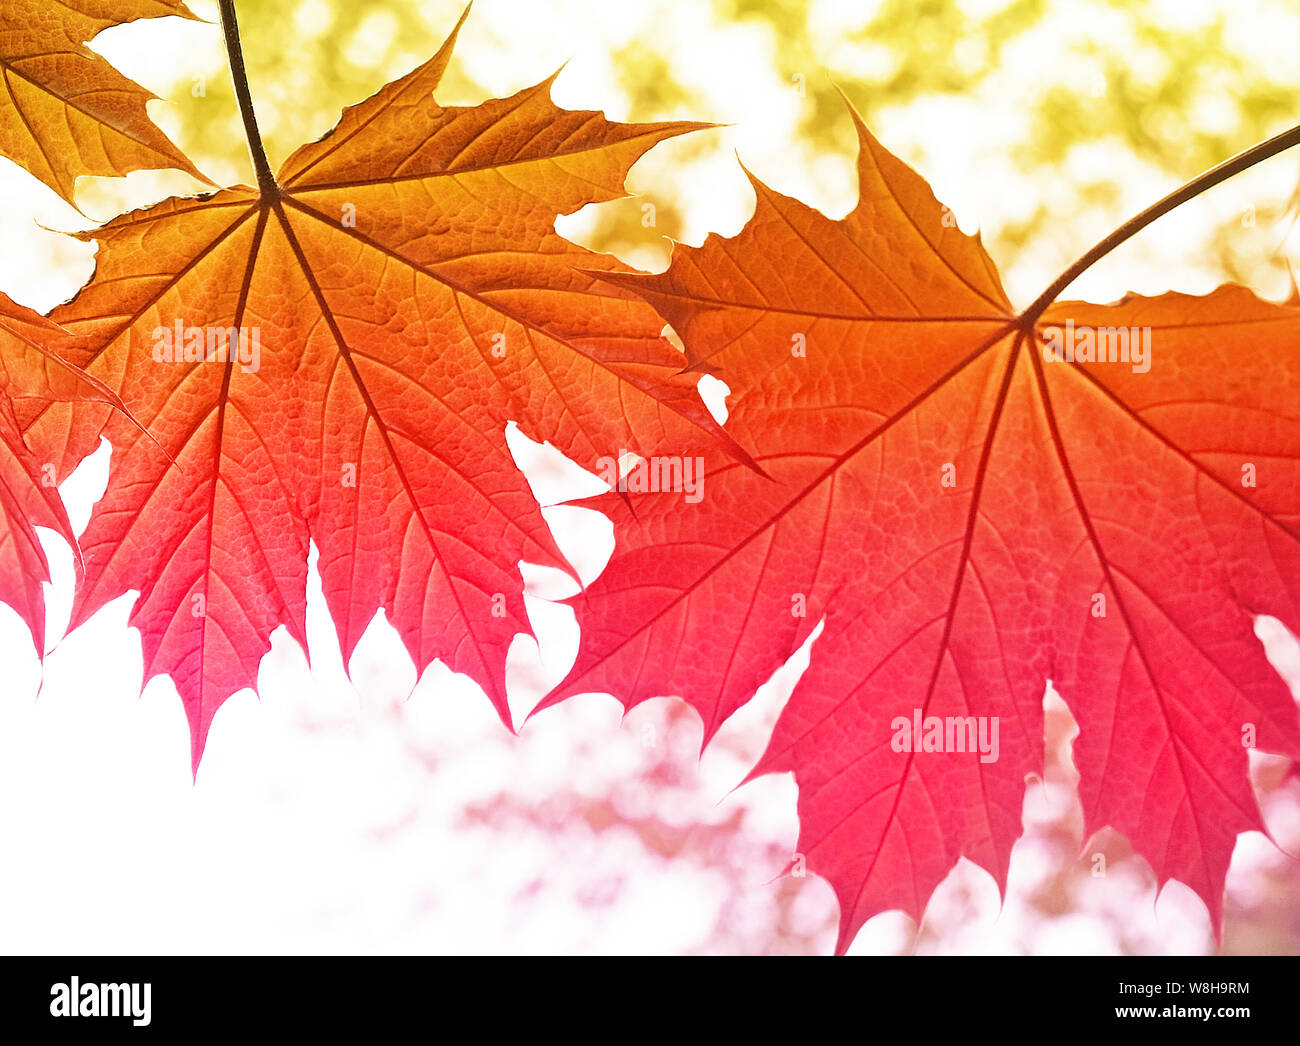 Maple leaves with variegated colors changing from orange gold to pink Stock Photo